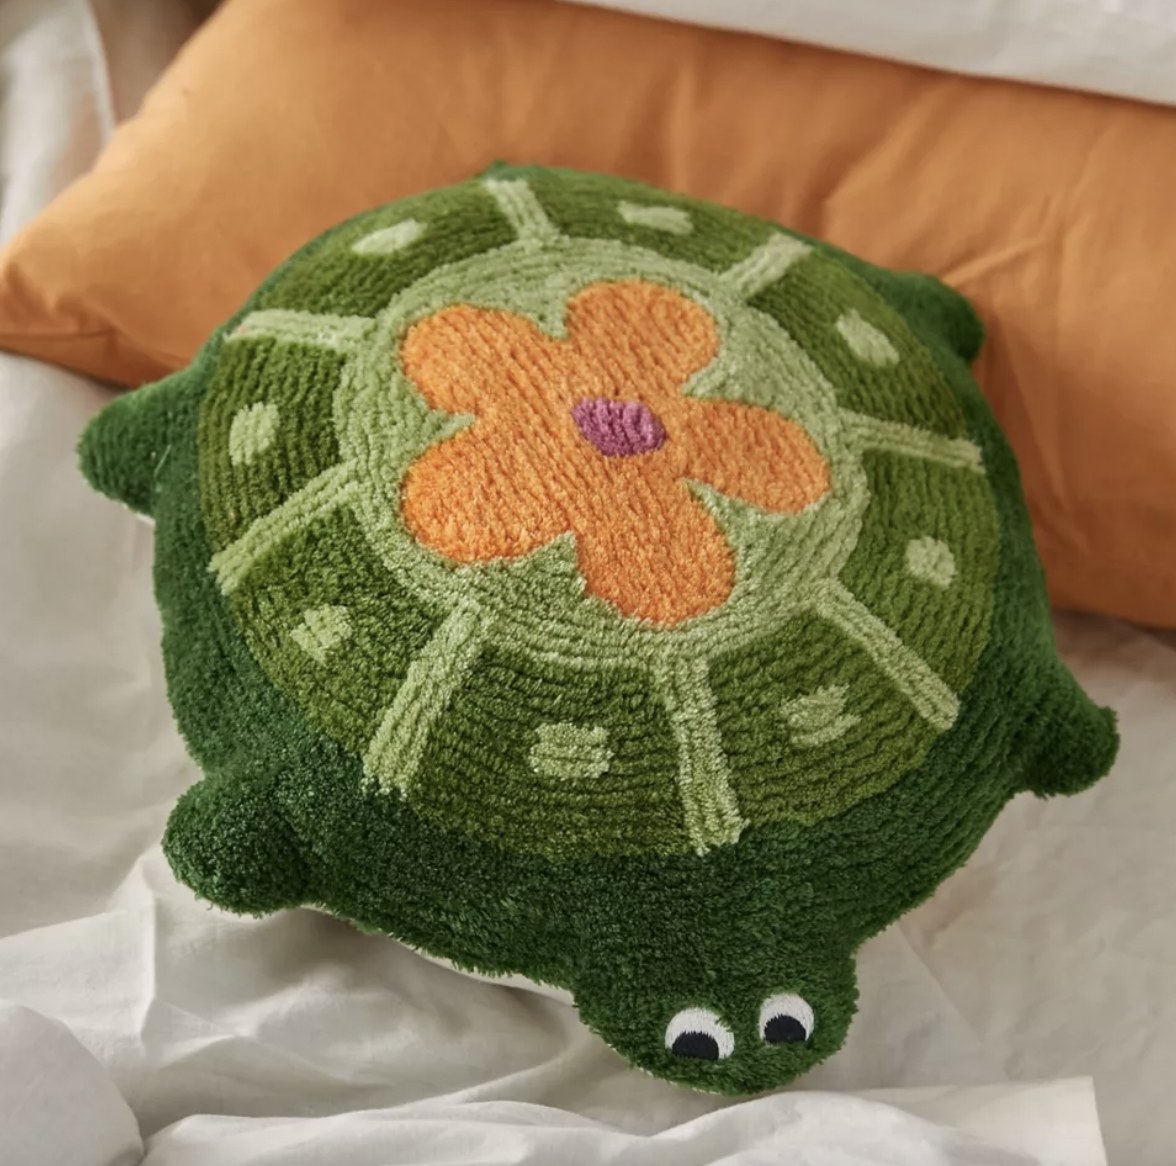 A green turtle-shaped throw pillow with an orange flower design on it